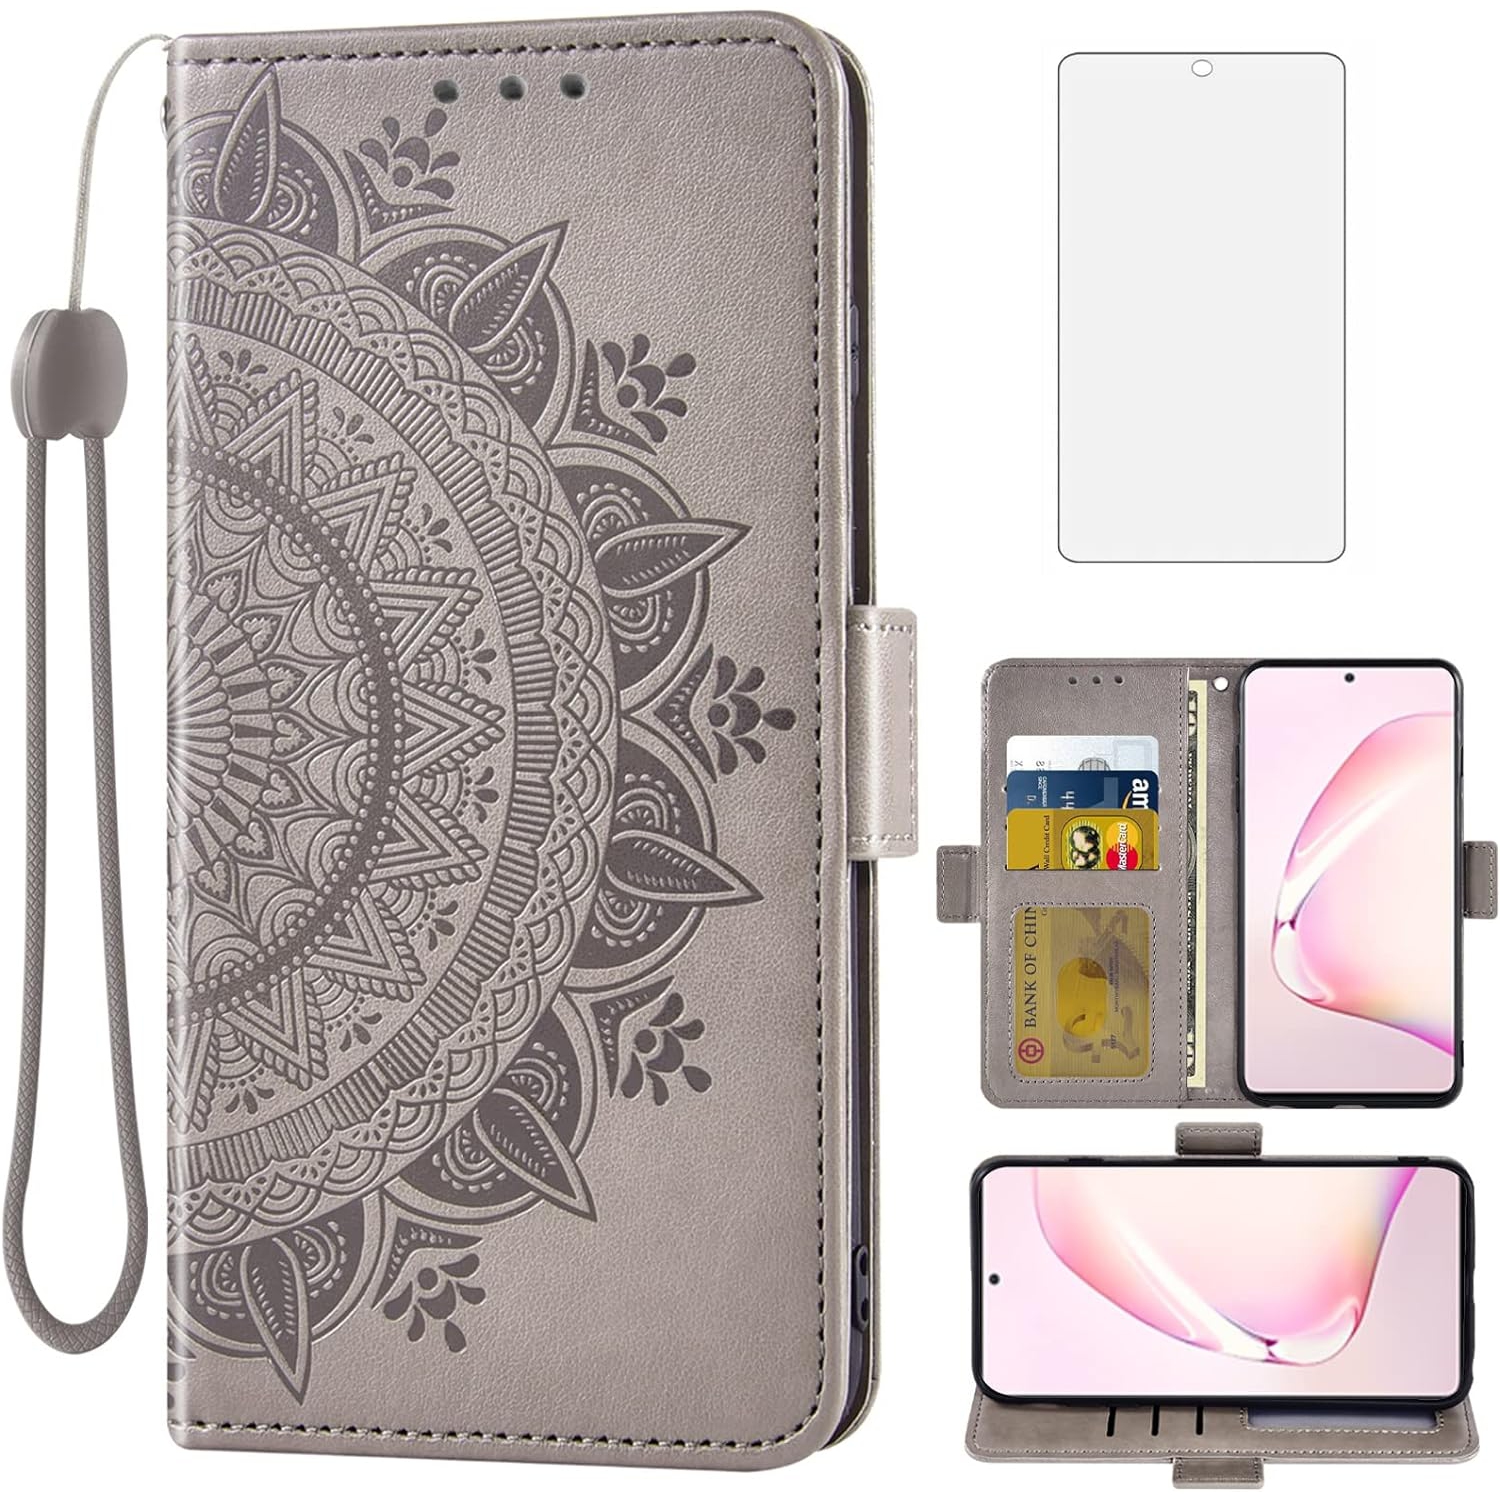 Compatible with Samsung Galaxy Note 10 Lite Wallet Case and Tempered Glass Screen Protector Card Holder Flip